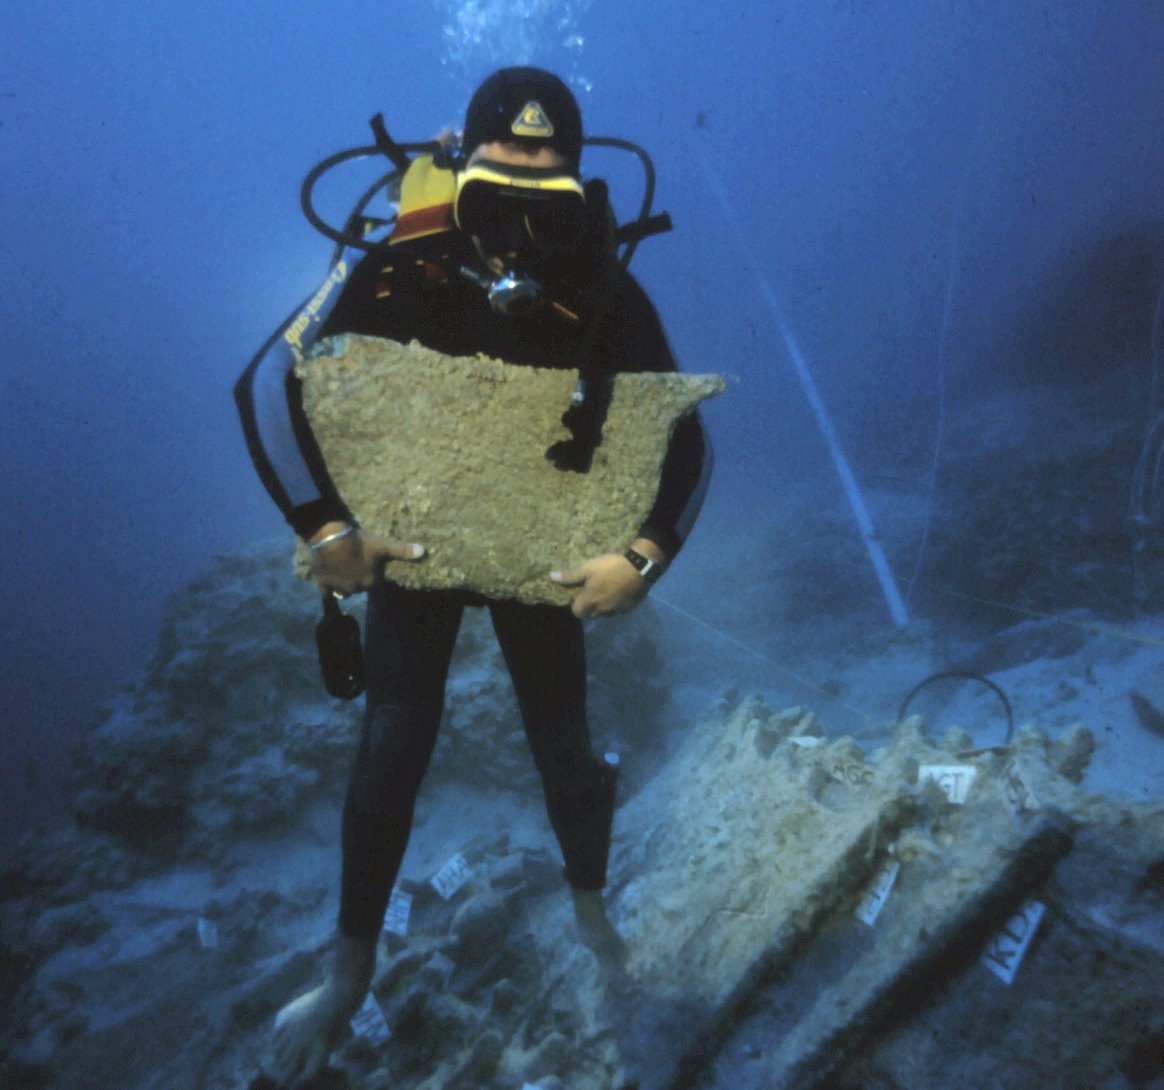 photo of diver from Uluburun shipwreck excavation